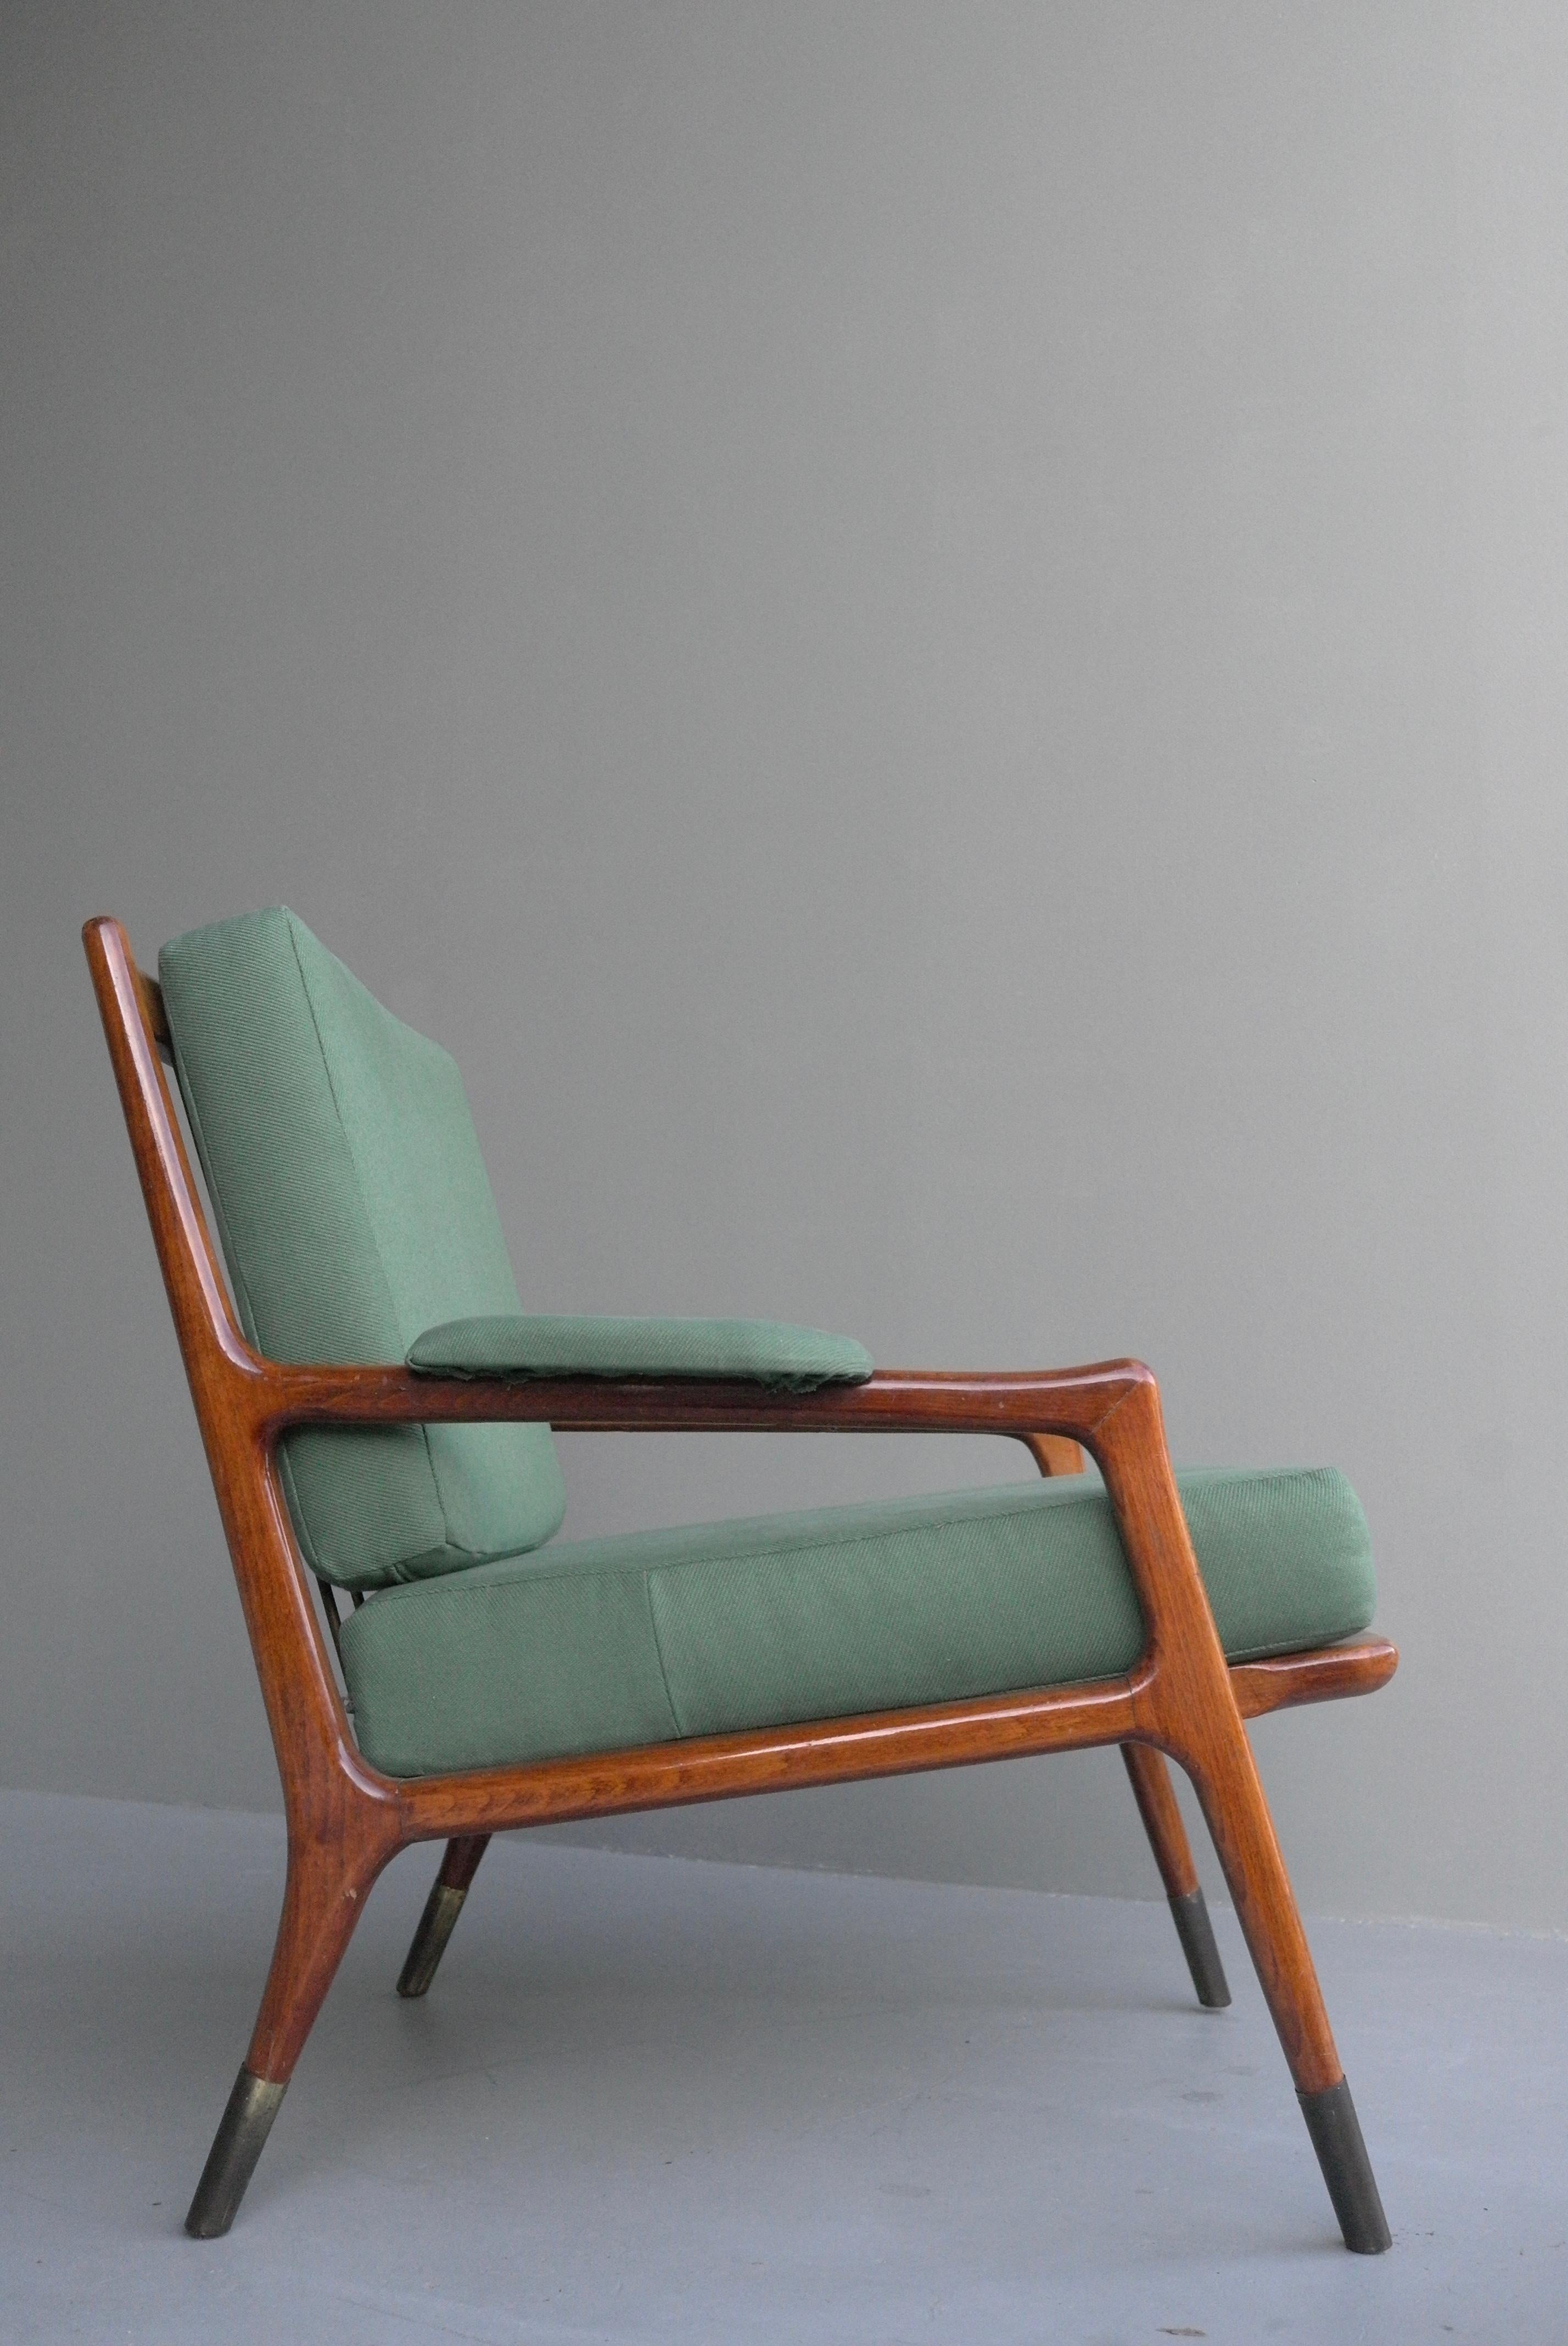 Gio Ponti Style Lounge Chair, Fine Brass Feet and Green Upholstery, Italy, 1955 For Sale 1